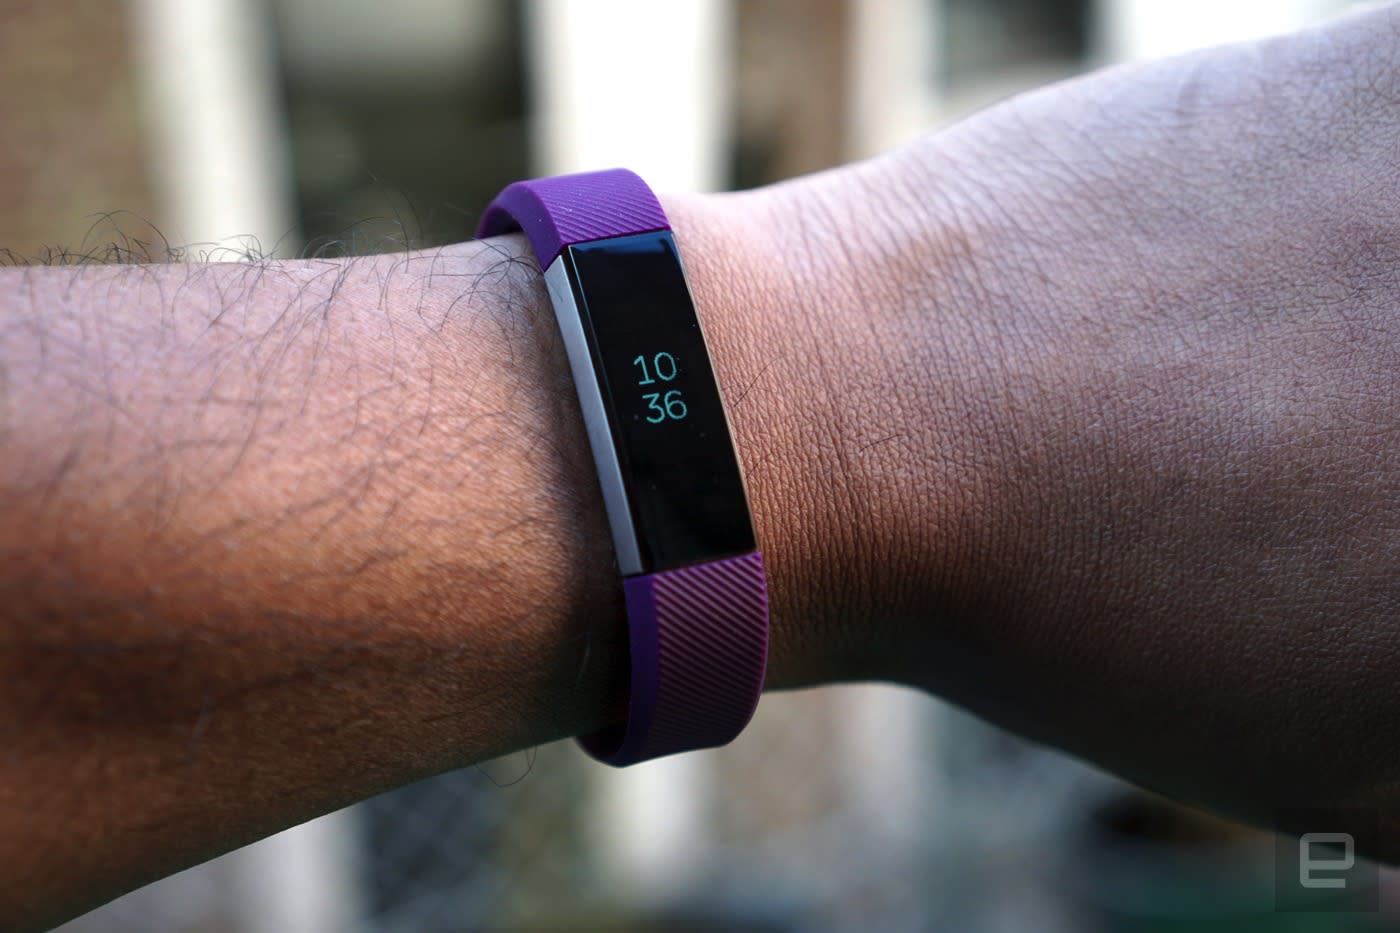 Fitbit's lead in the wearable world shrinks due to newcomers